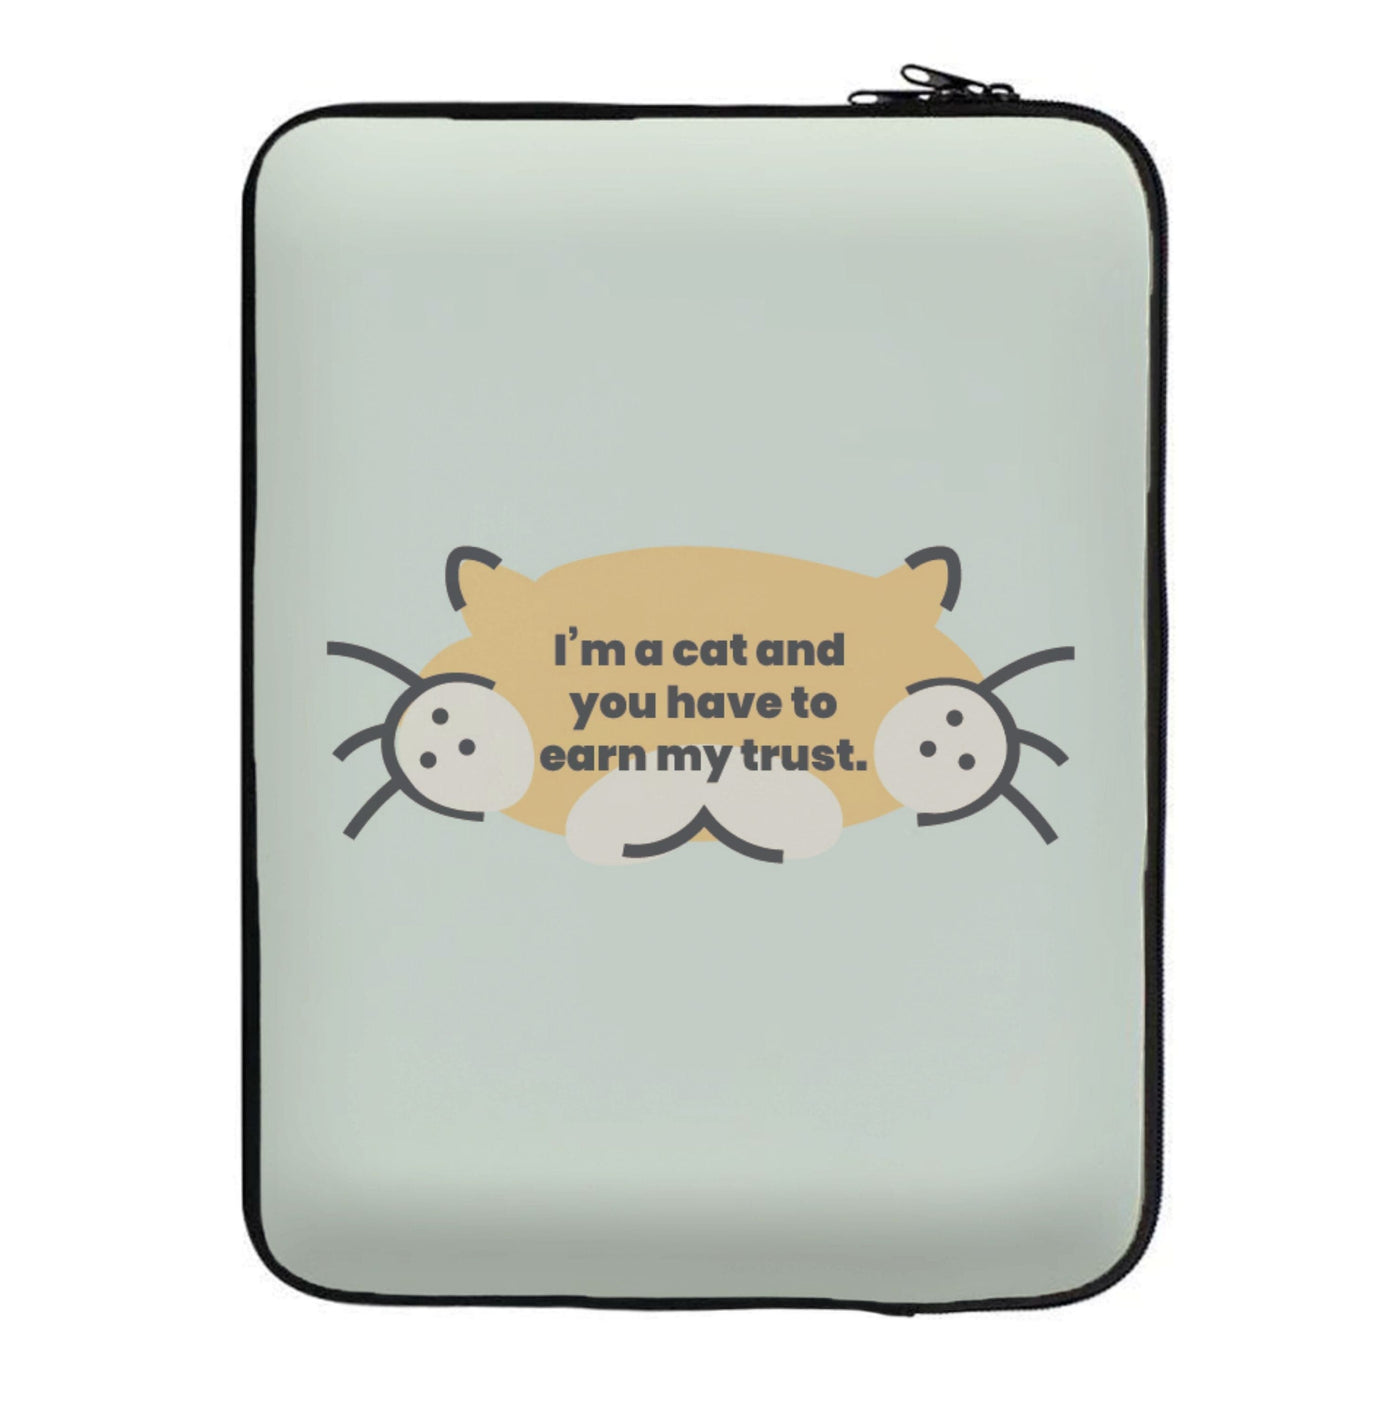 I'm a cat and you have to earn my trust - Kendall Jenner Laptop Sleeve